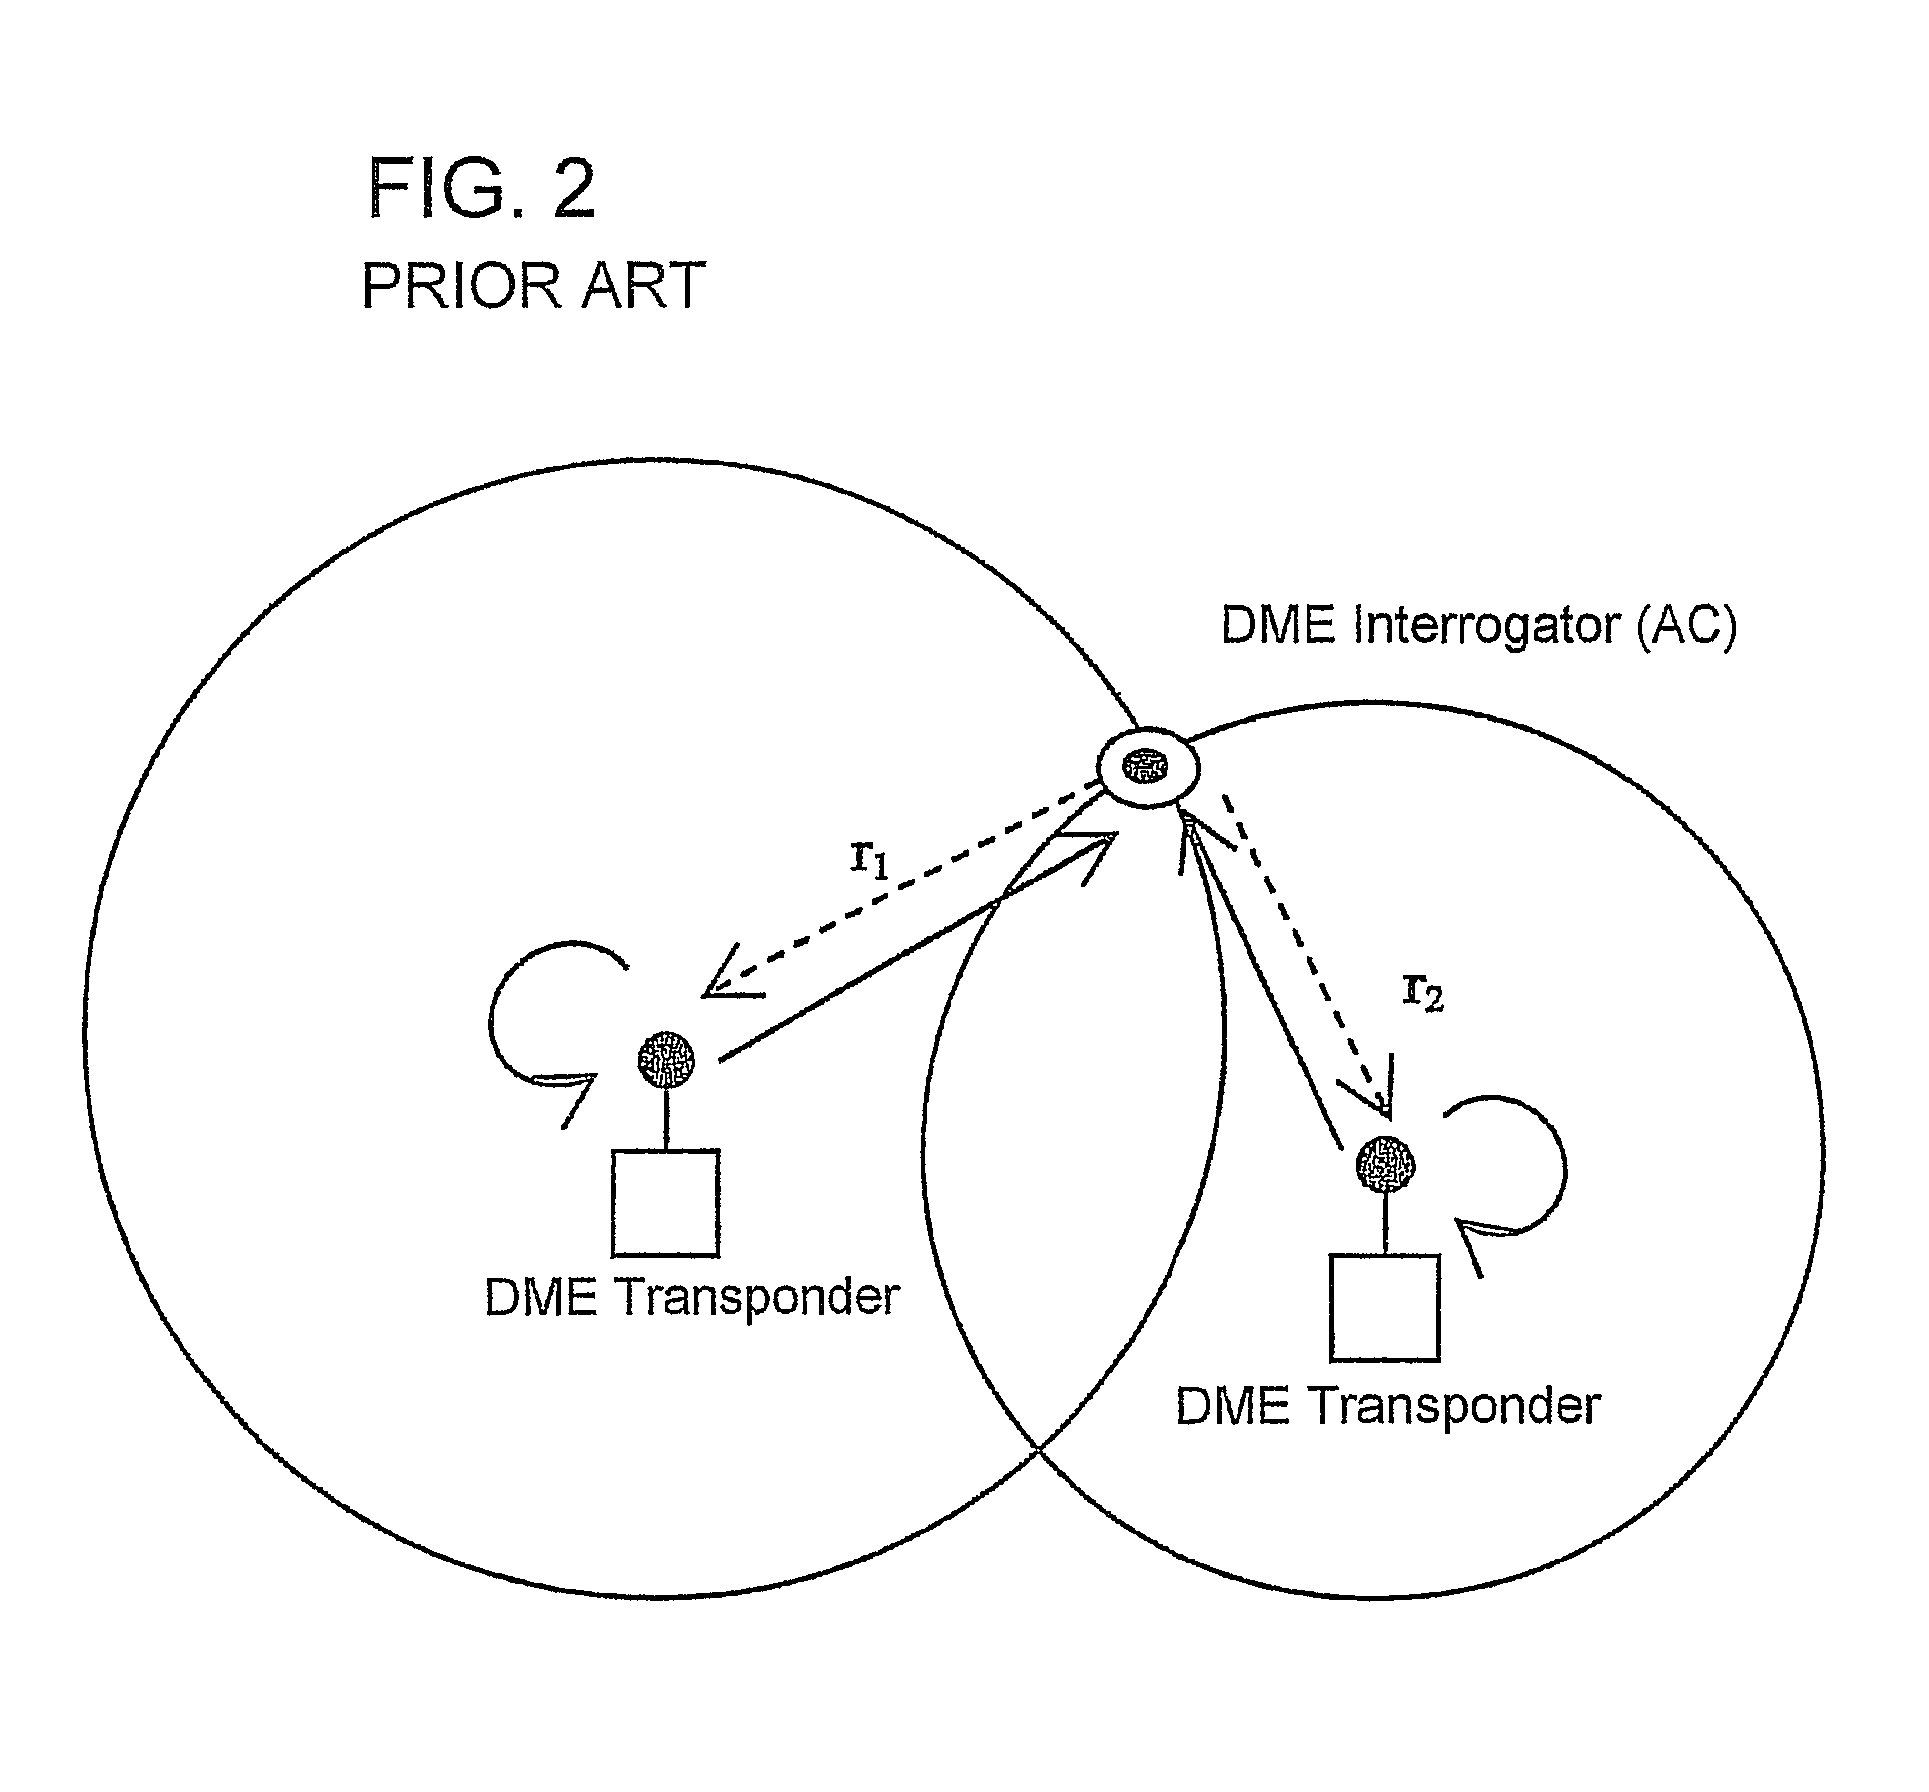 System and method for aircraft navigation using signals transmitted in the DME transponder frequency range